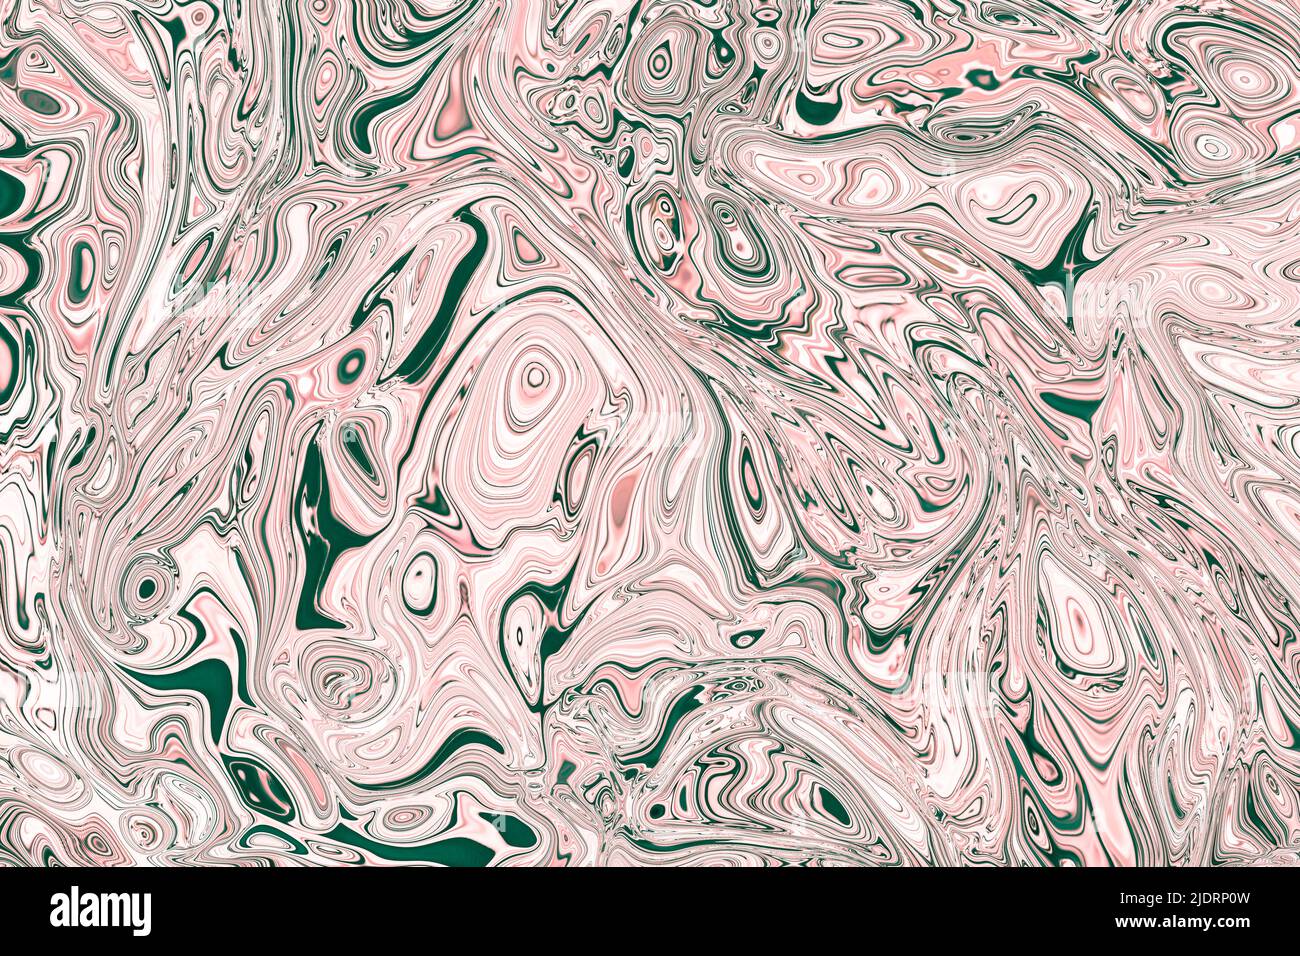 Psychedelic ink bubbles background with mixed pink and dark green paints. Conceptual fluid with acrylic painting in chaotic and grotesk mood. Marble w Stock Photo